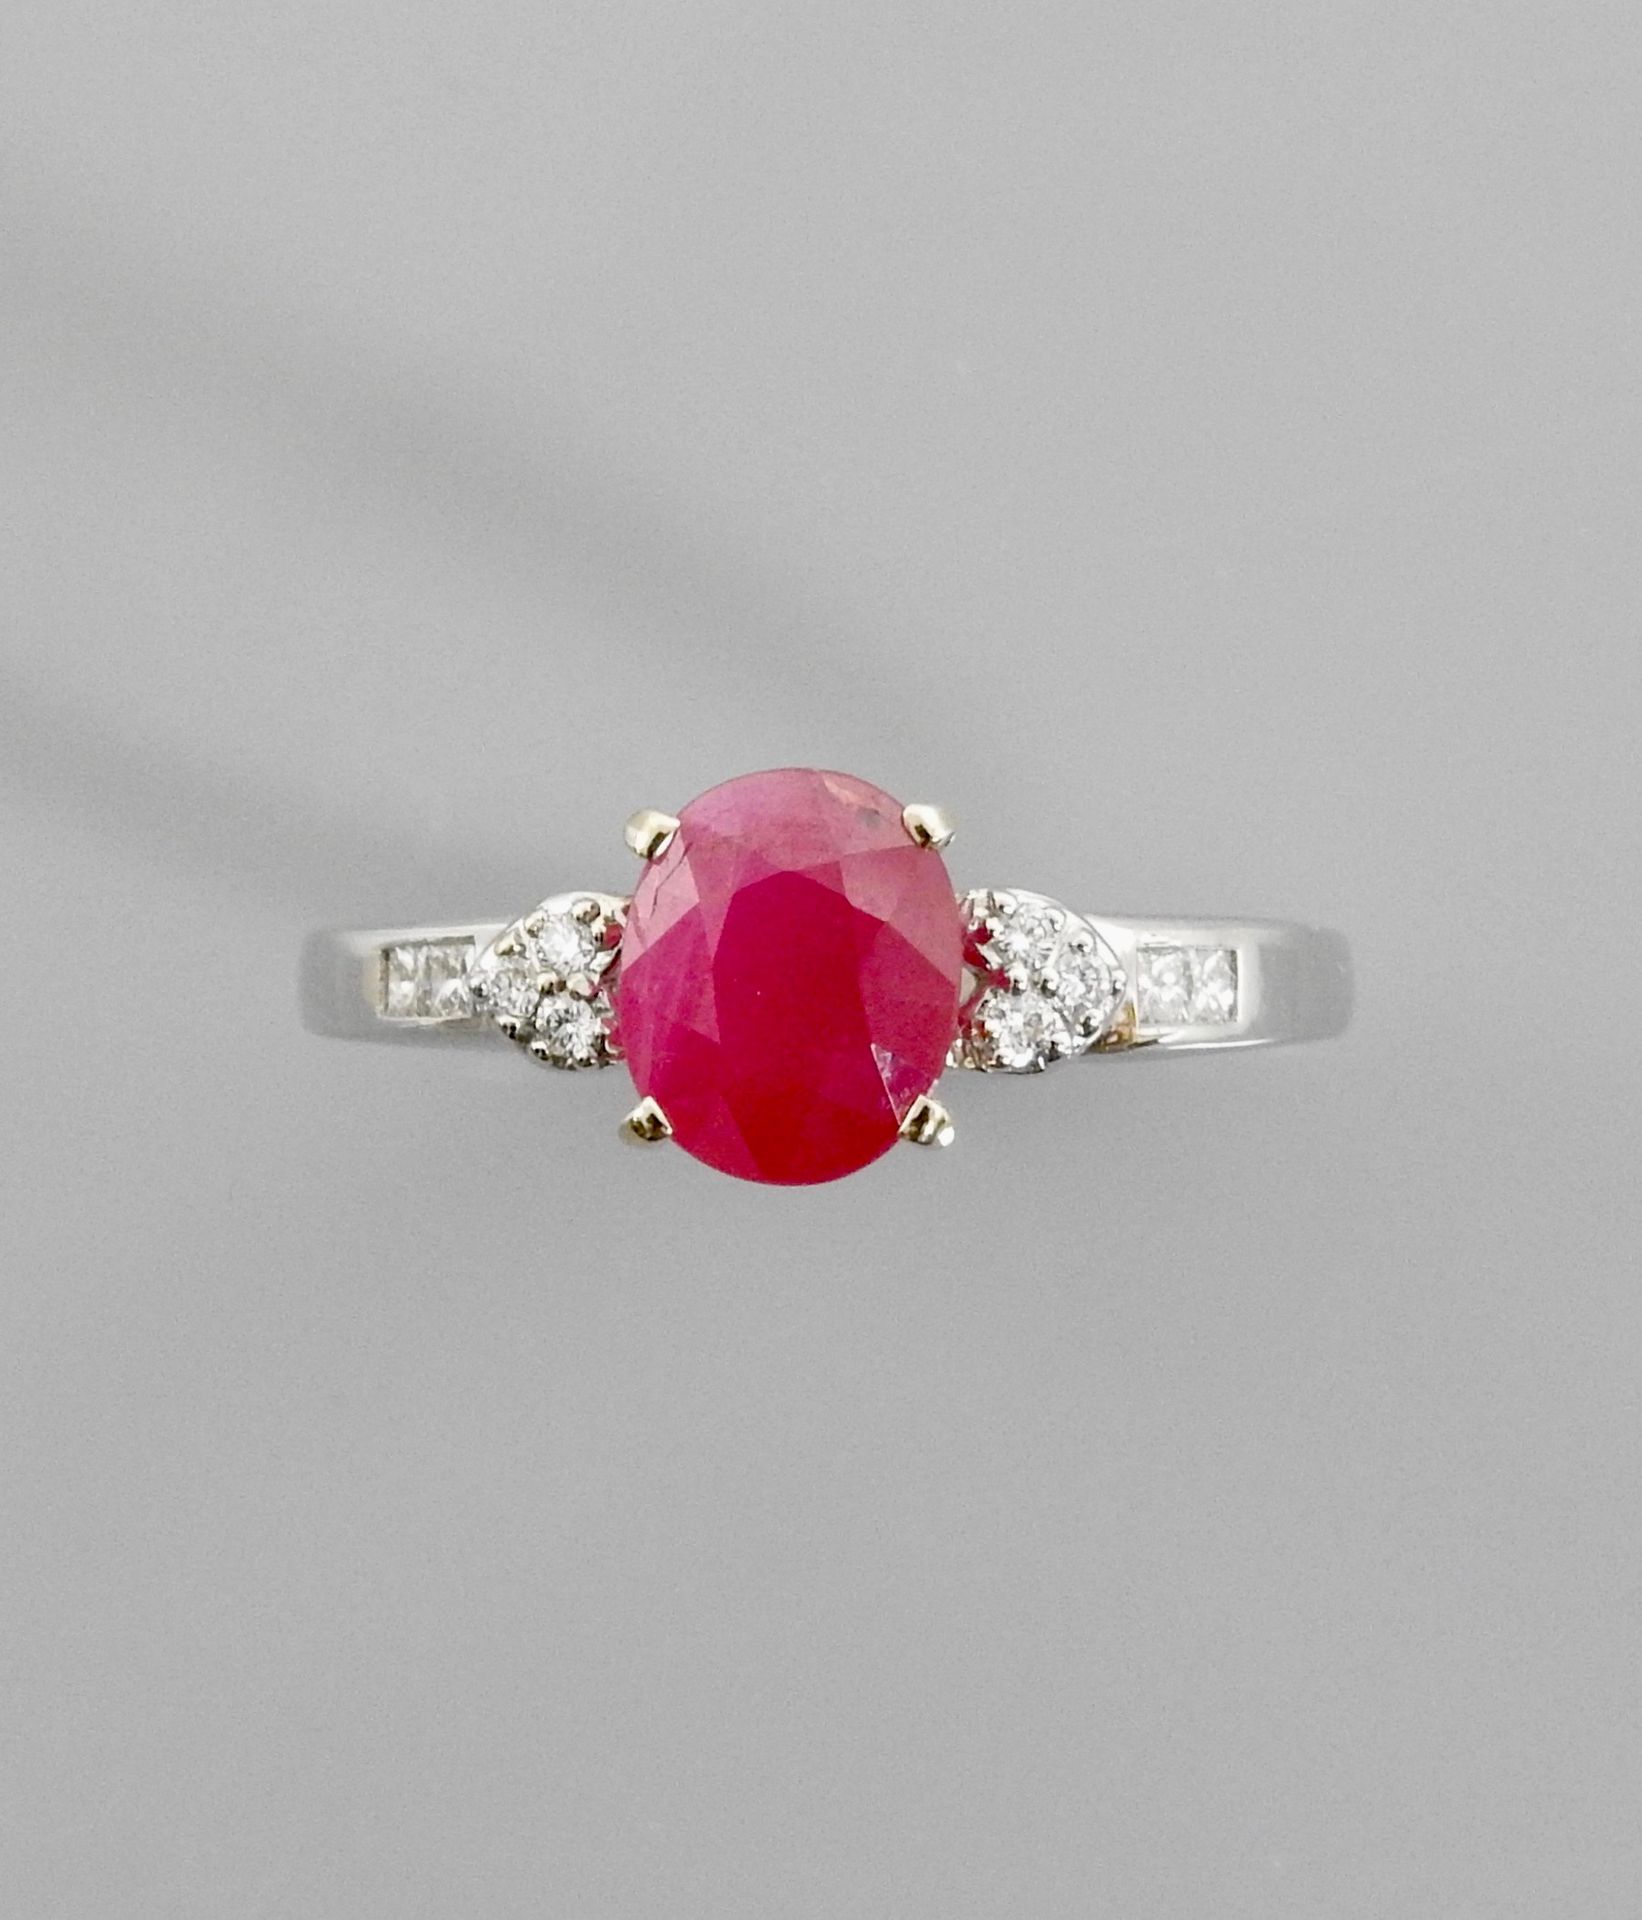 Null Ring in white gold, 750 MM, set with a beautiful oval ruby weighing 1.89 ca&hellip;